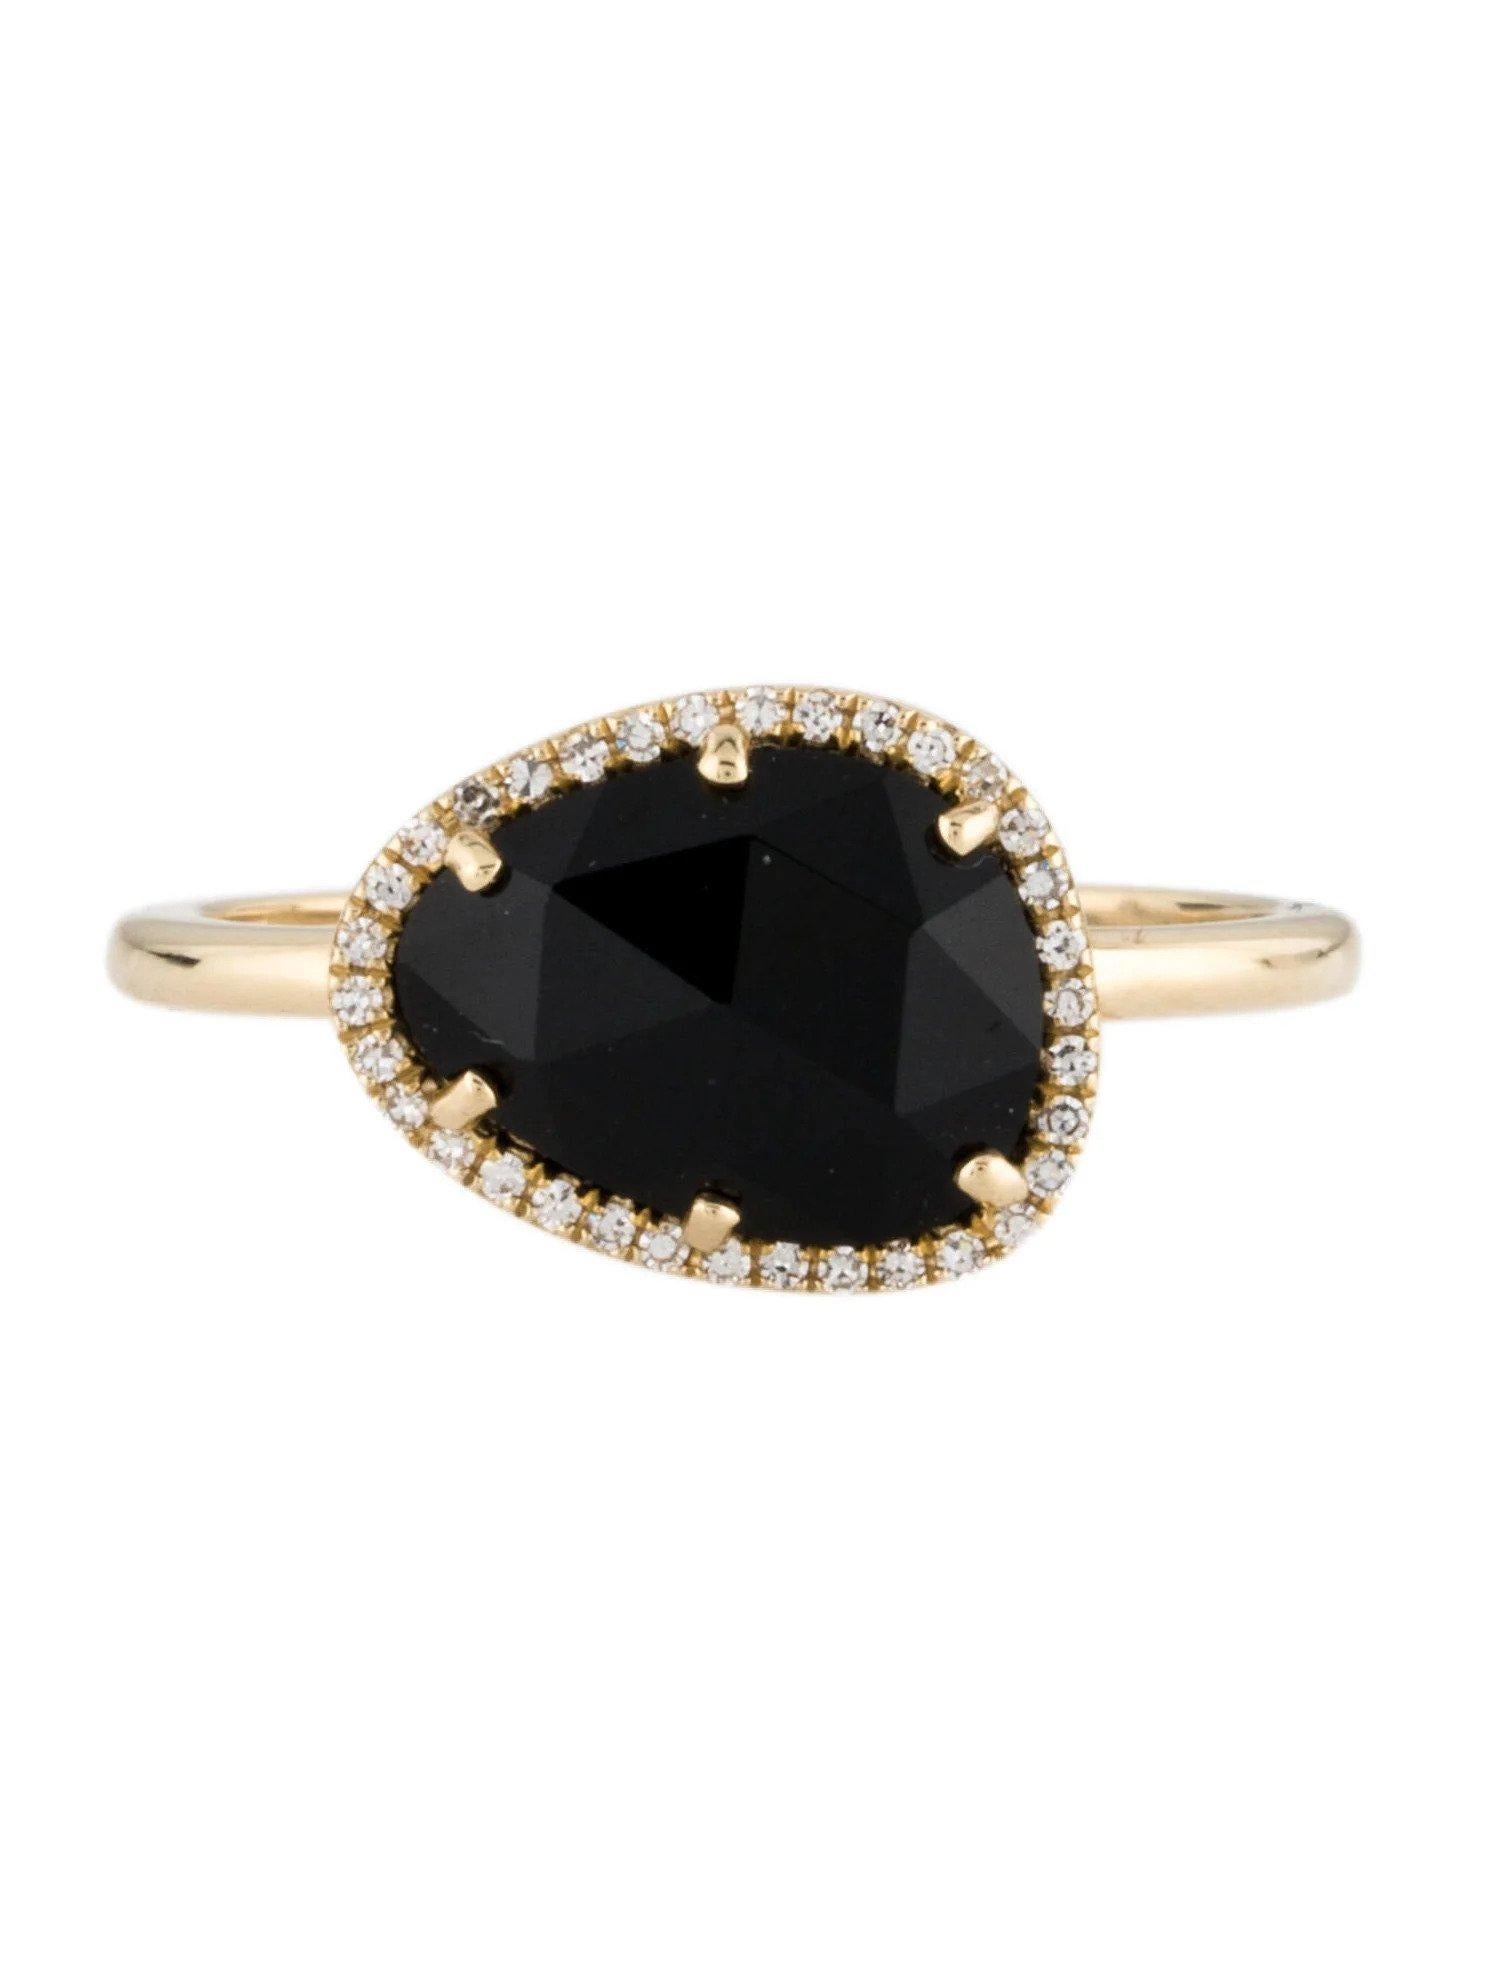 This Onyx & Diamond Ring is a stunning and timeless accessory that can add a touch of glamour and sophistication to any outfit. 

This ring features a 1.56 Carat Onyx (12 x 9 MM), with a Diamond Halo comprised of 0.08 Carats of Single Cut Round